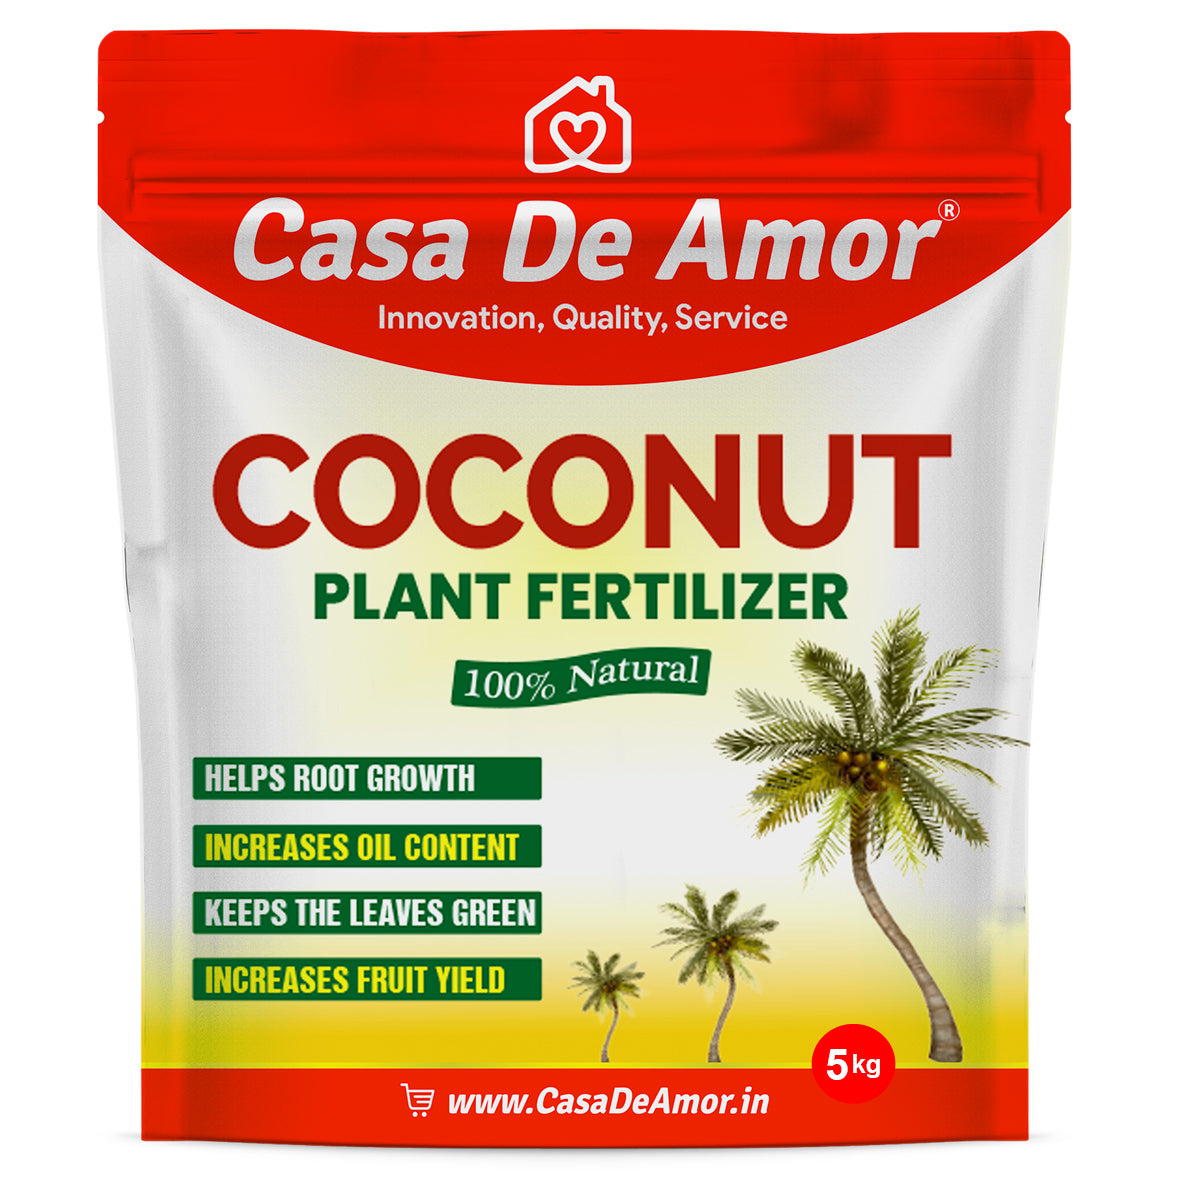 Coconut Plant Fertilizer, 100% Natural, Helps Root Growth and Yield